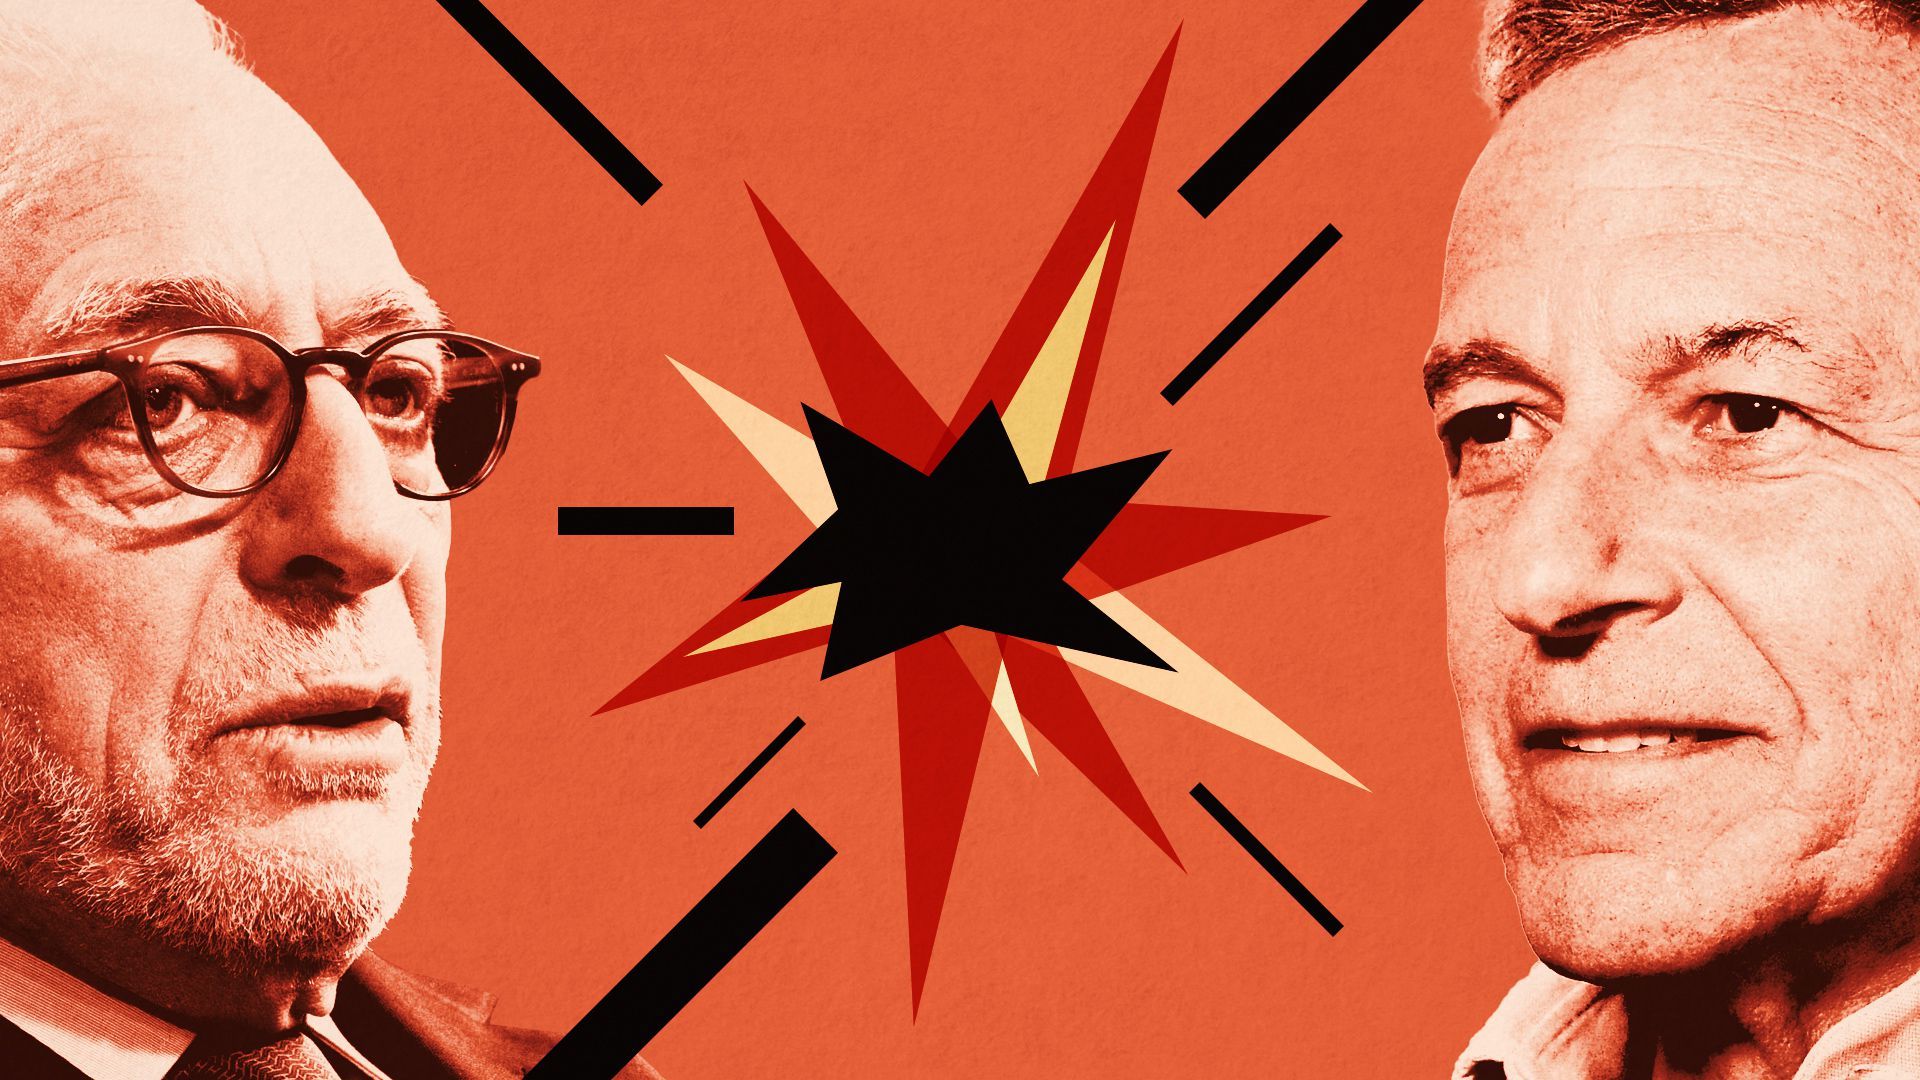 Photo illustration of Nelson Peltz and Bob Iger with an explosion made of abstract shapes between them.